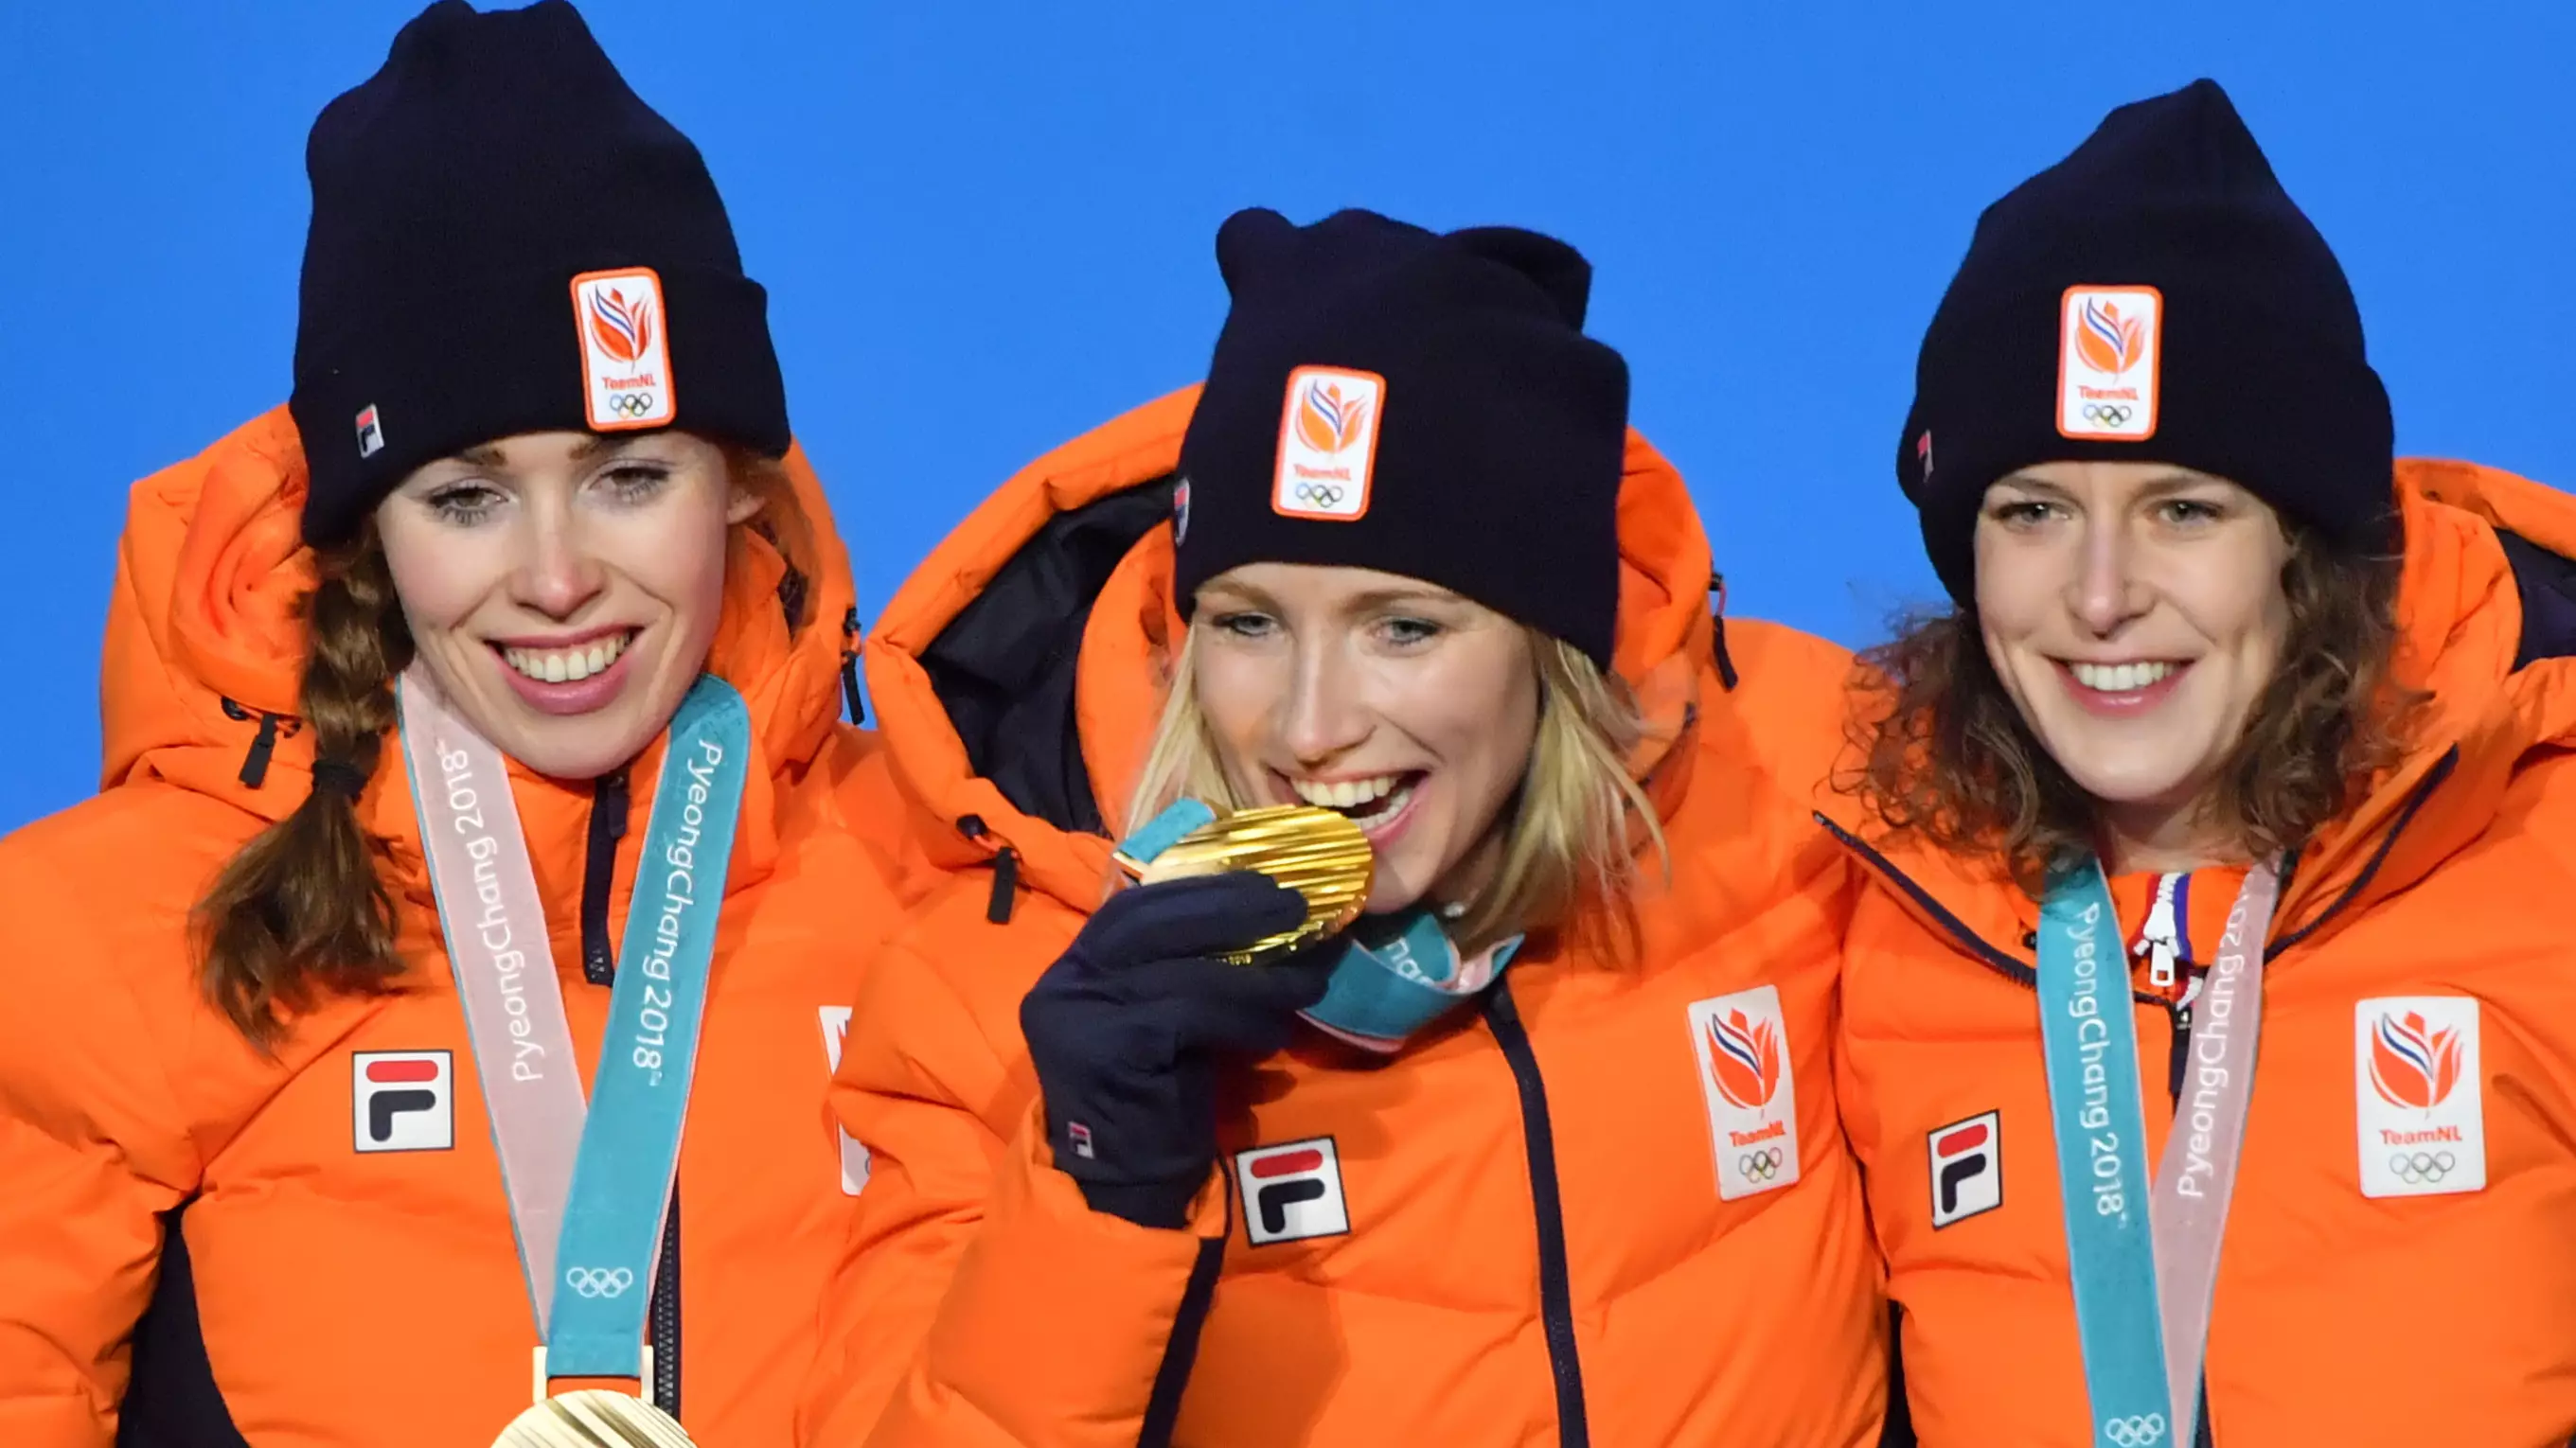 Dutch People Trolled Donald Trump At The Winter Olympics With Flag